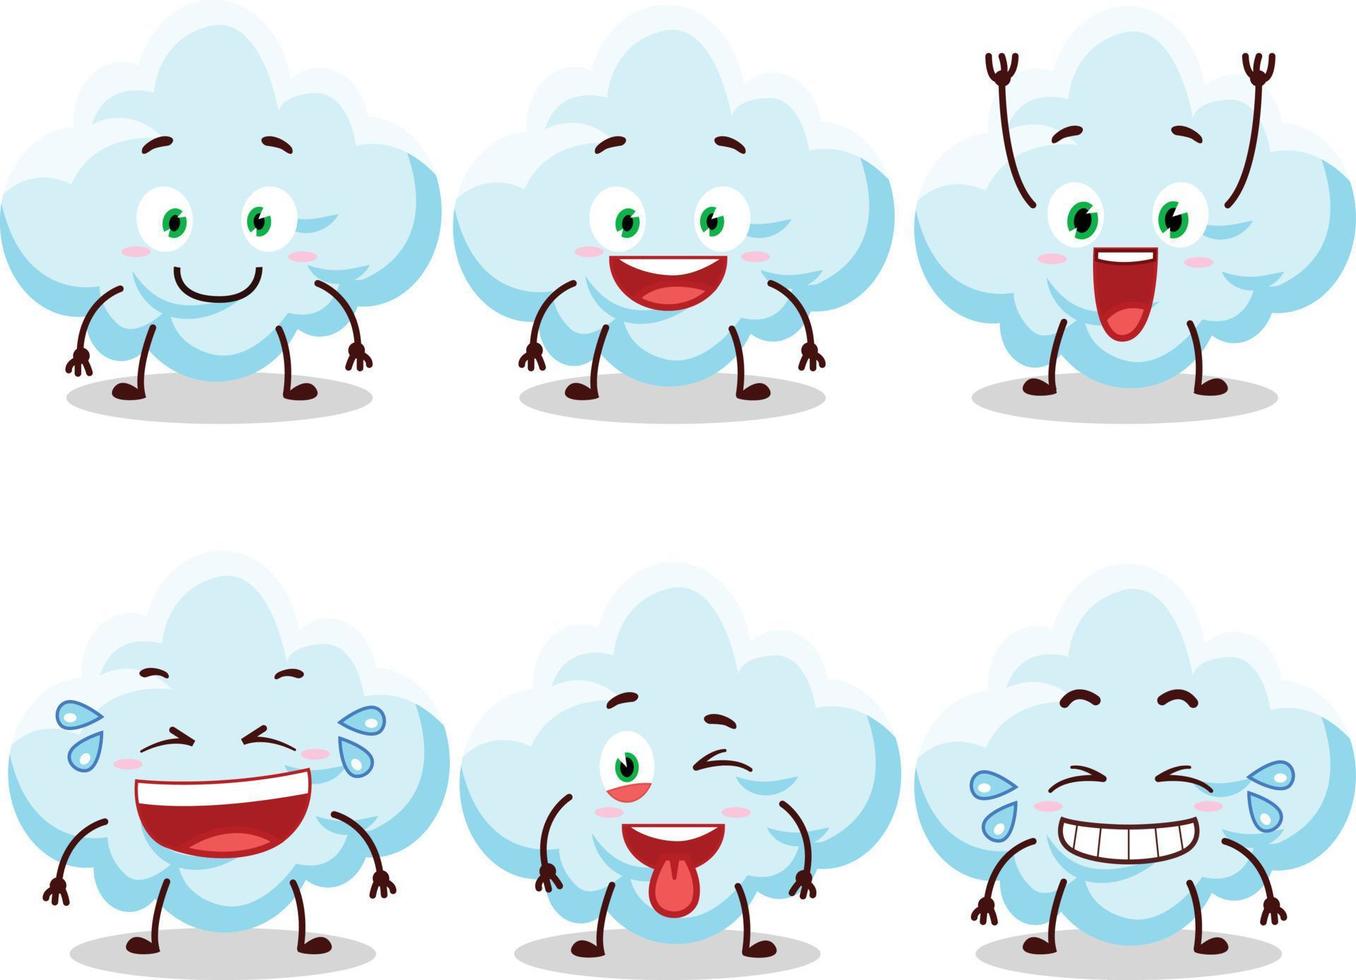 Cartoon character of cloud with smile expression vector